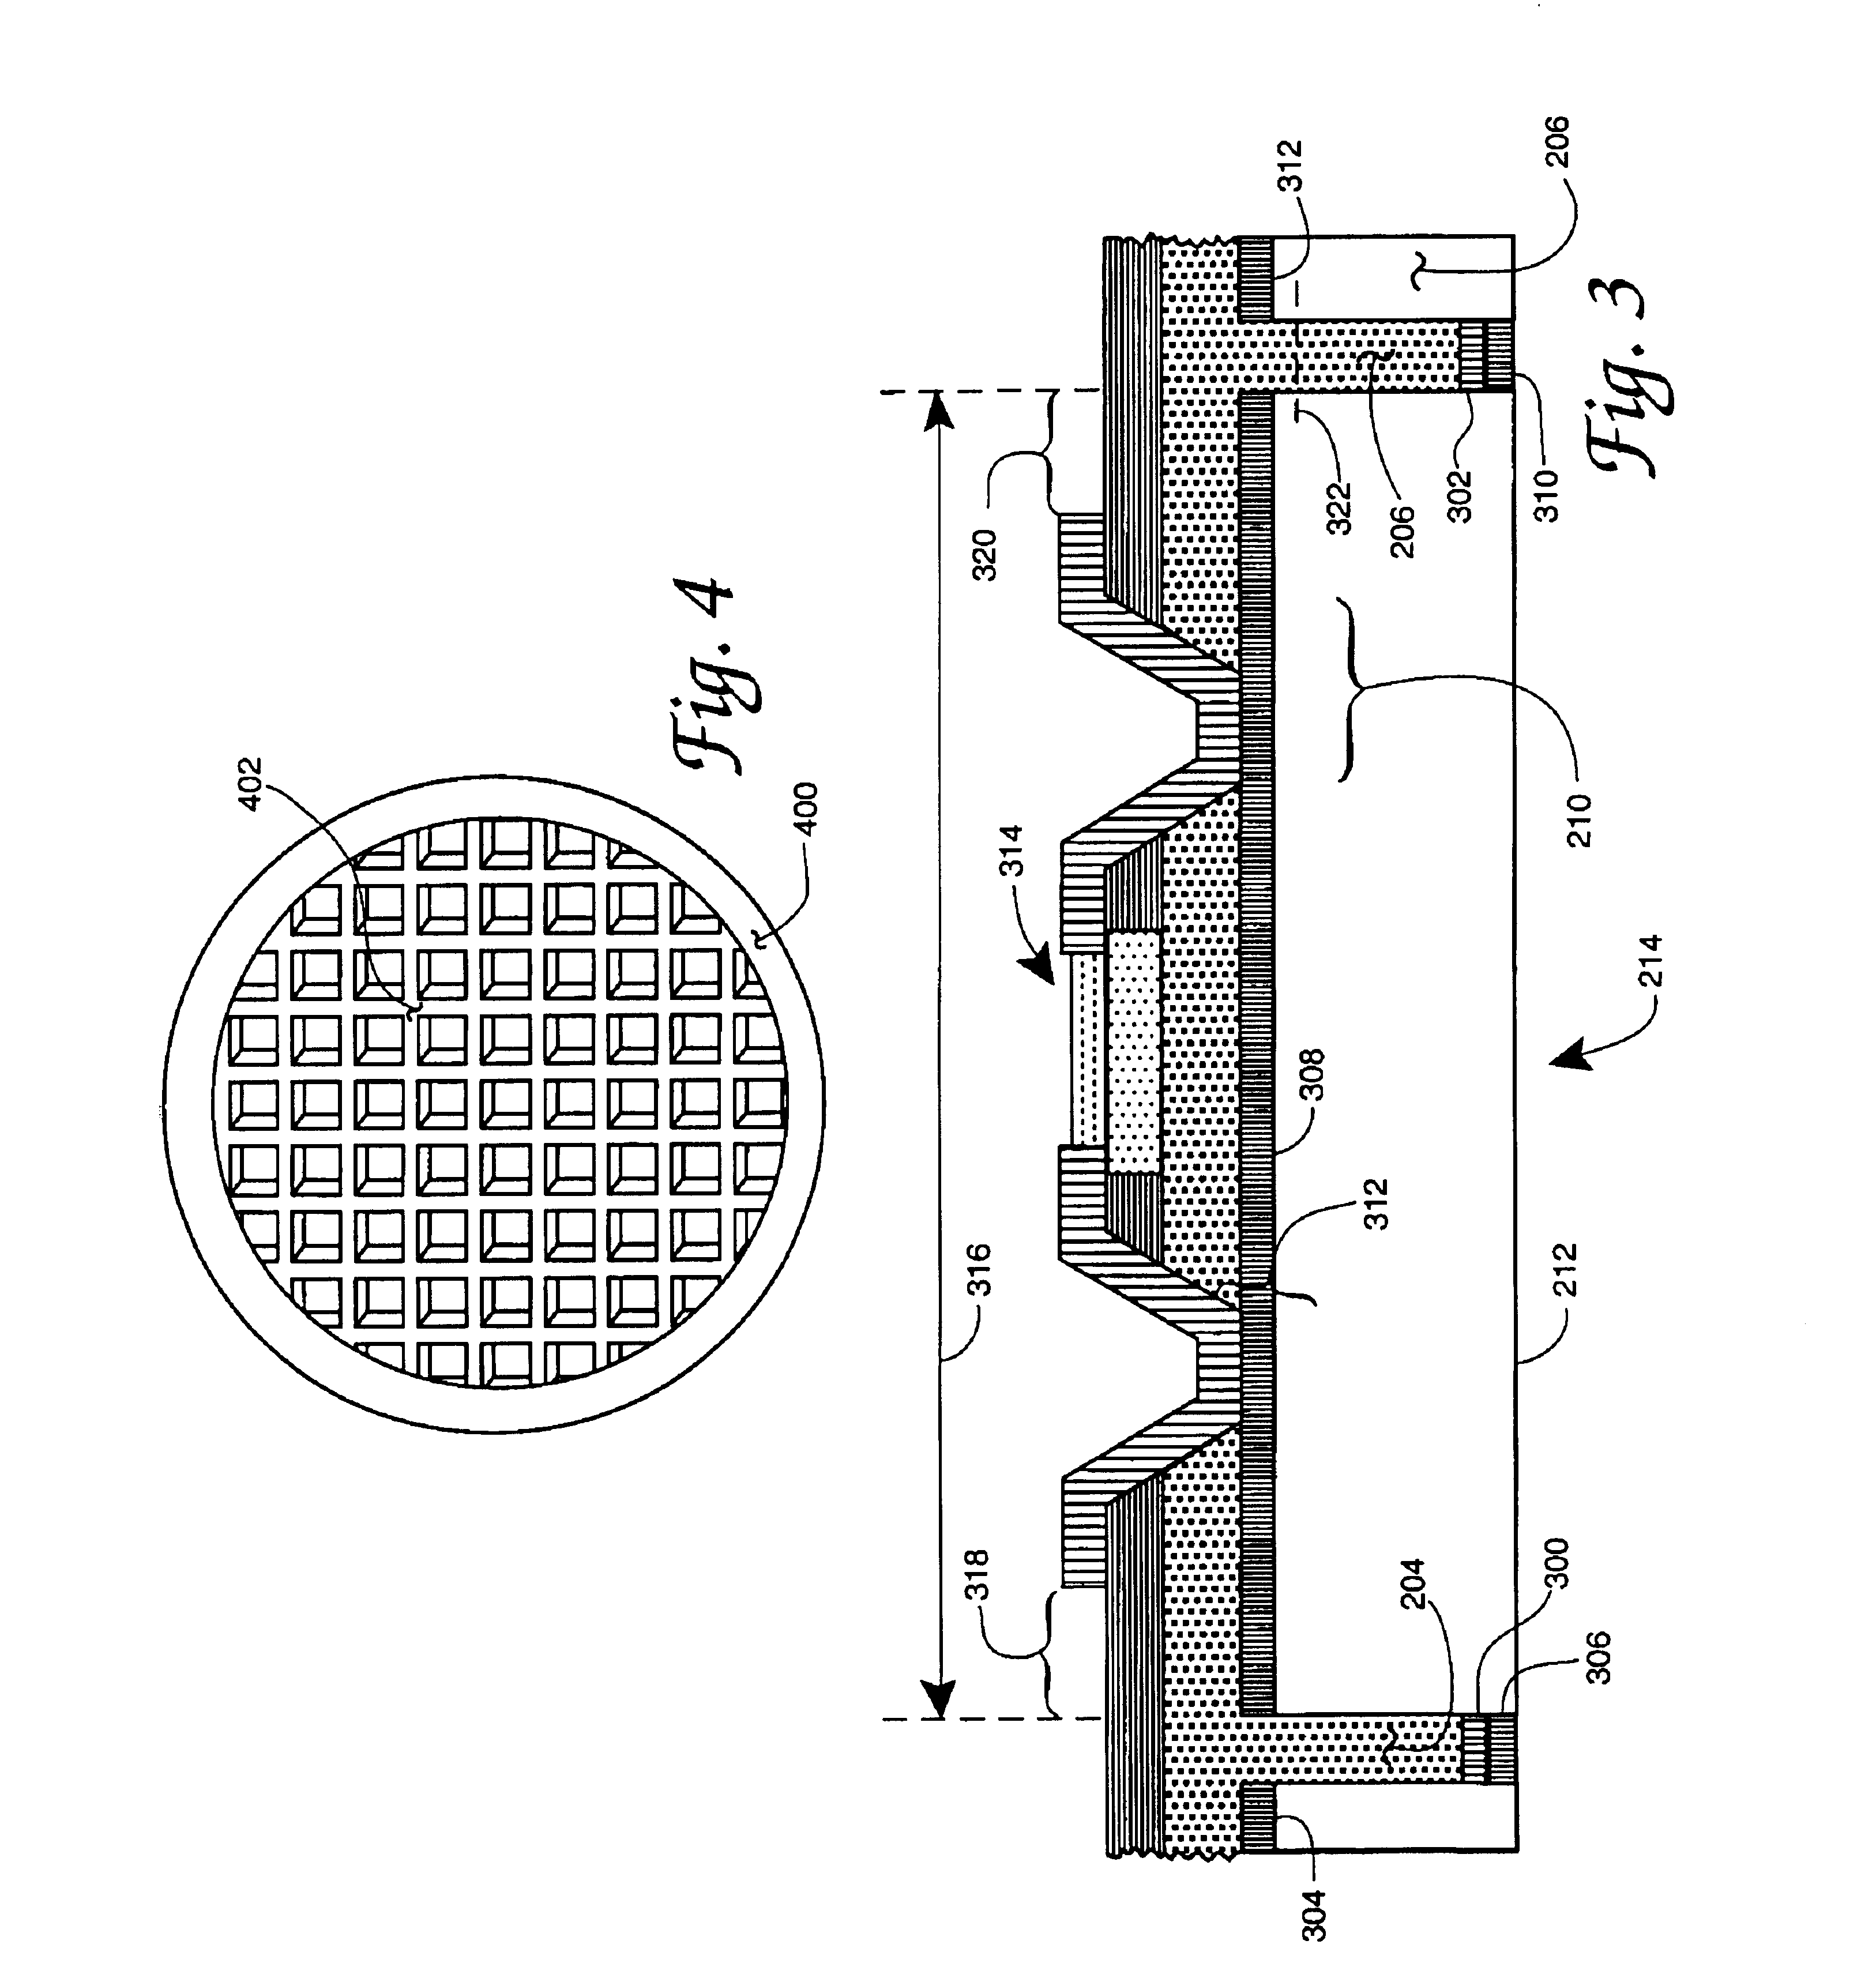 Stiffened backside fabrication for microwave radio frequency wafers